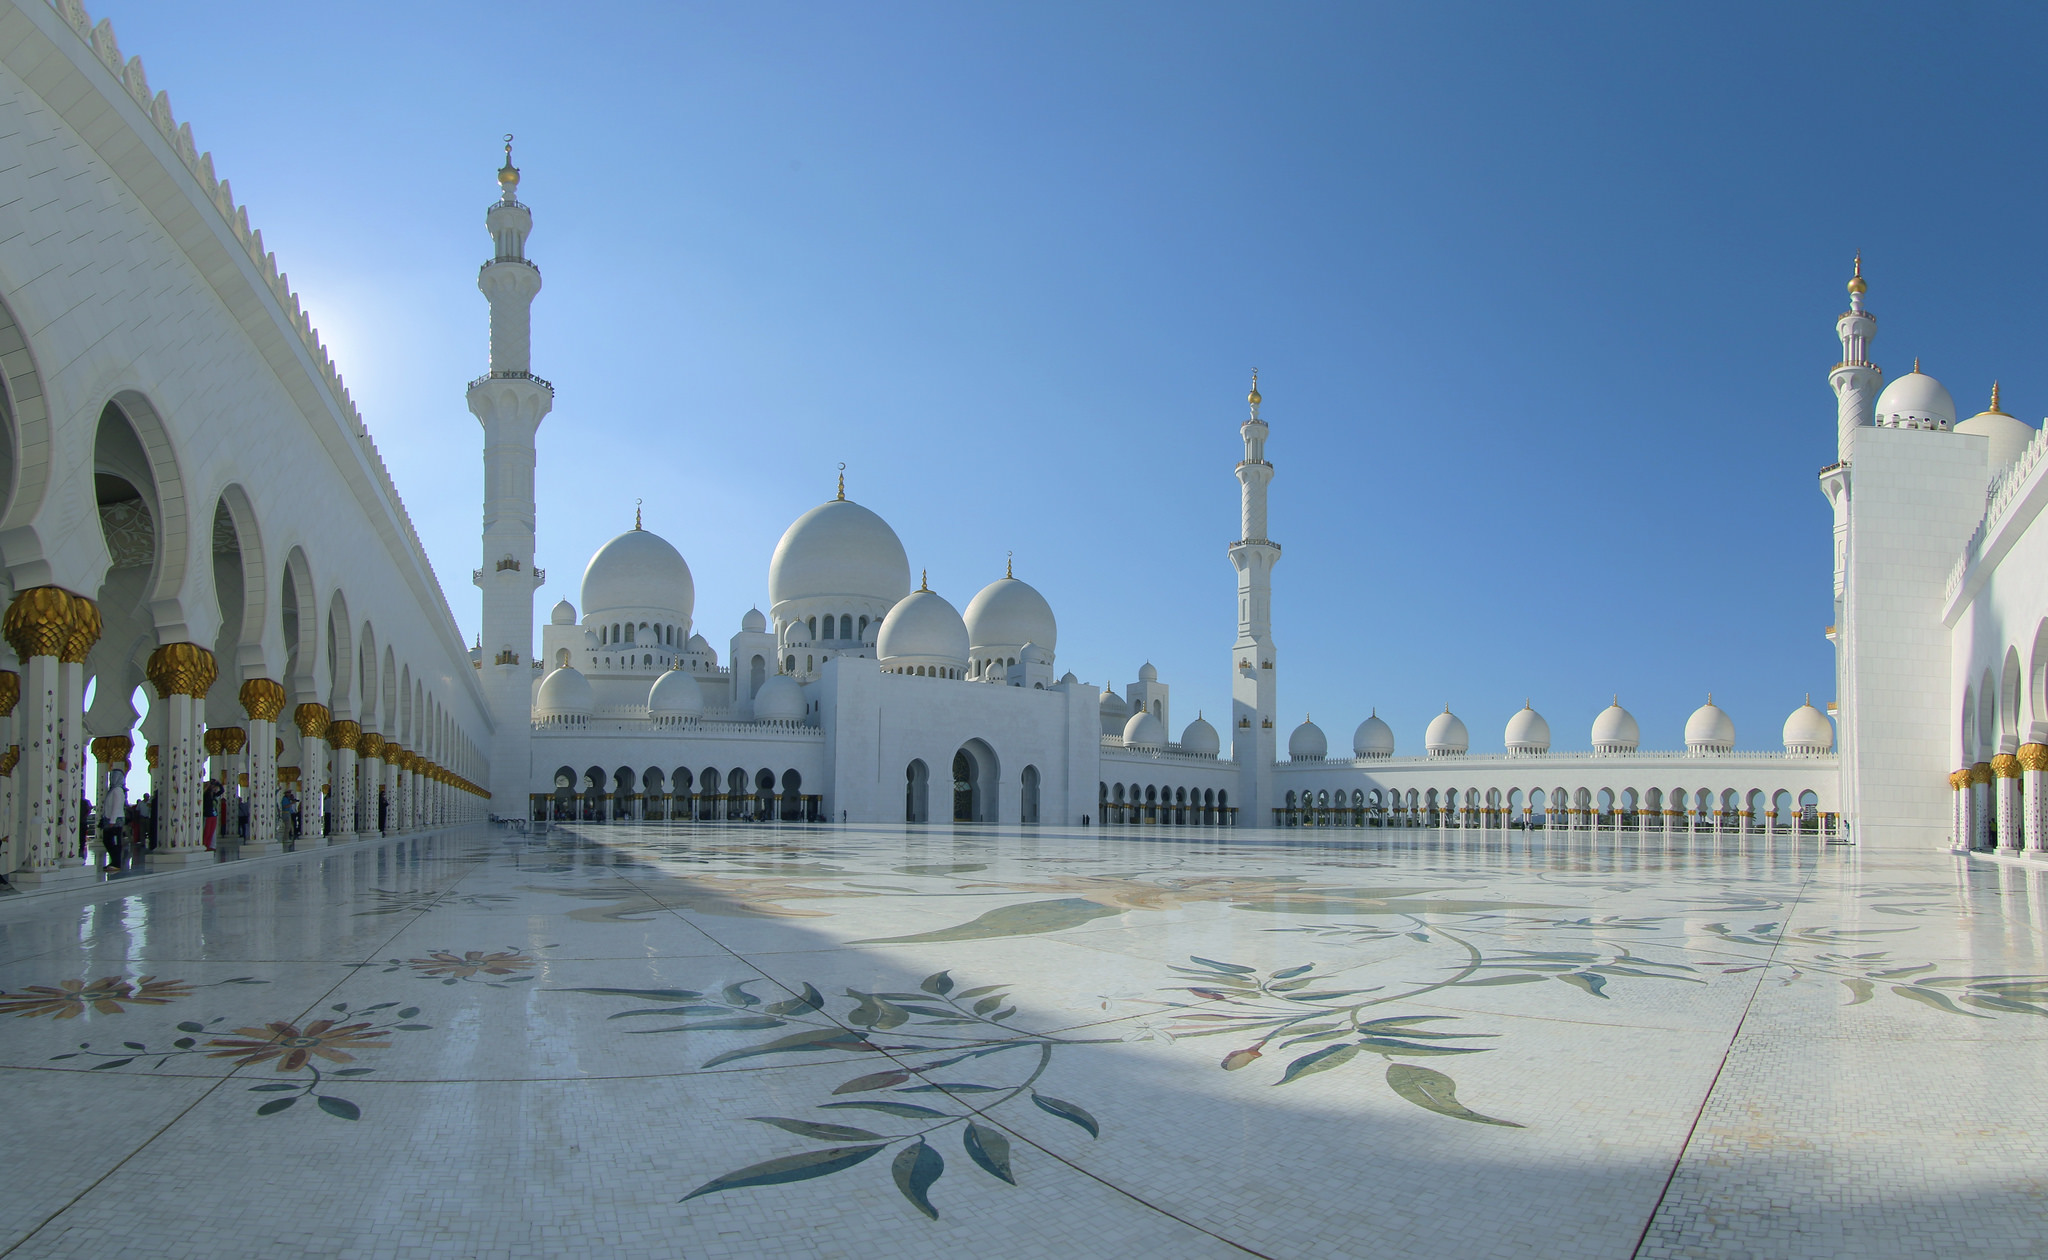 HD desktop wallpaper: Architecture, Dome, United Arab Emirates, Abu Dhabi,  Mosque, Place, Religious, Sheikh Zayed Grand Mosque, Mosques download free  picture #404877